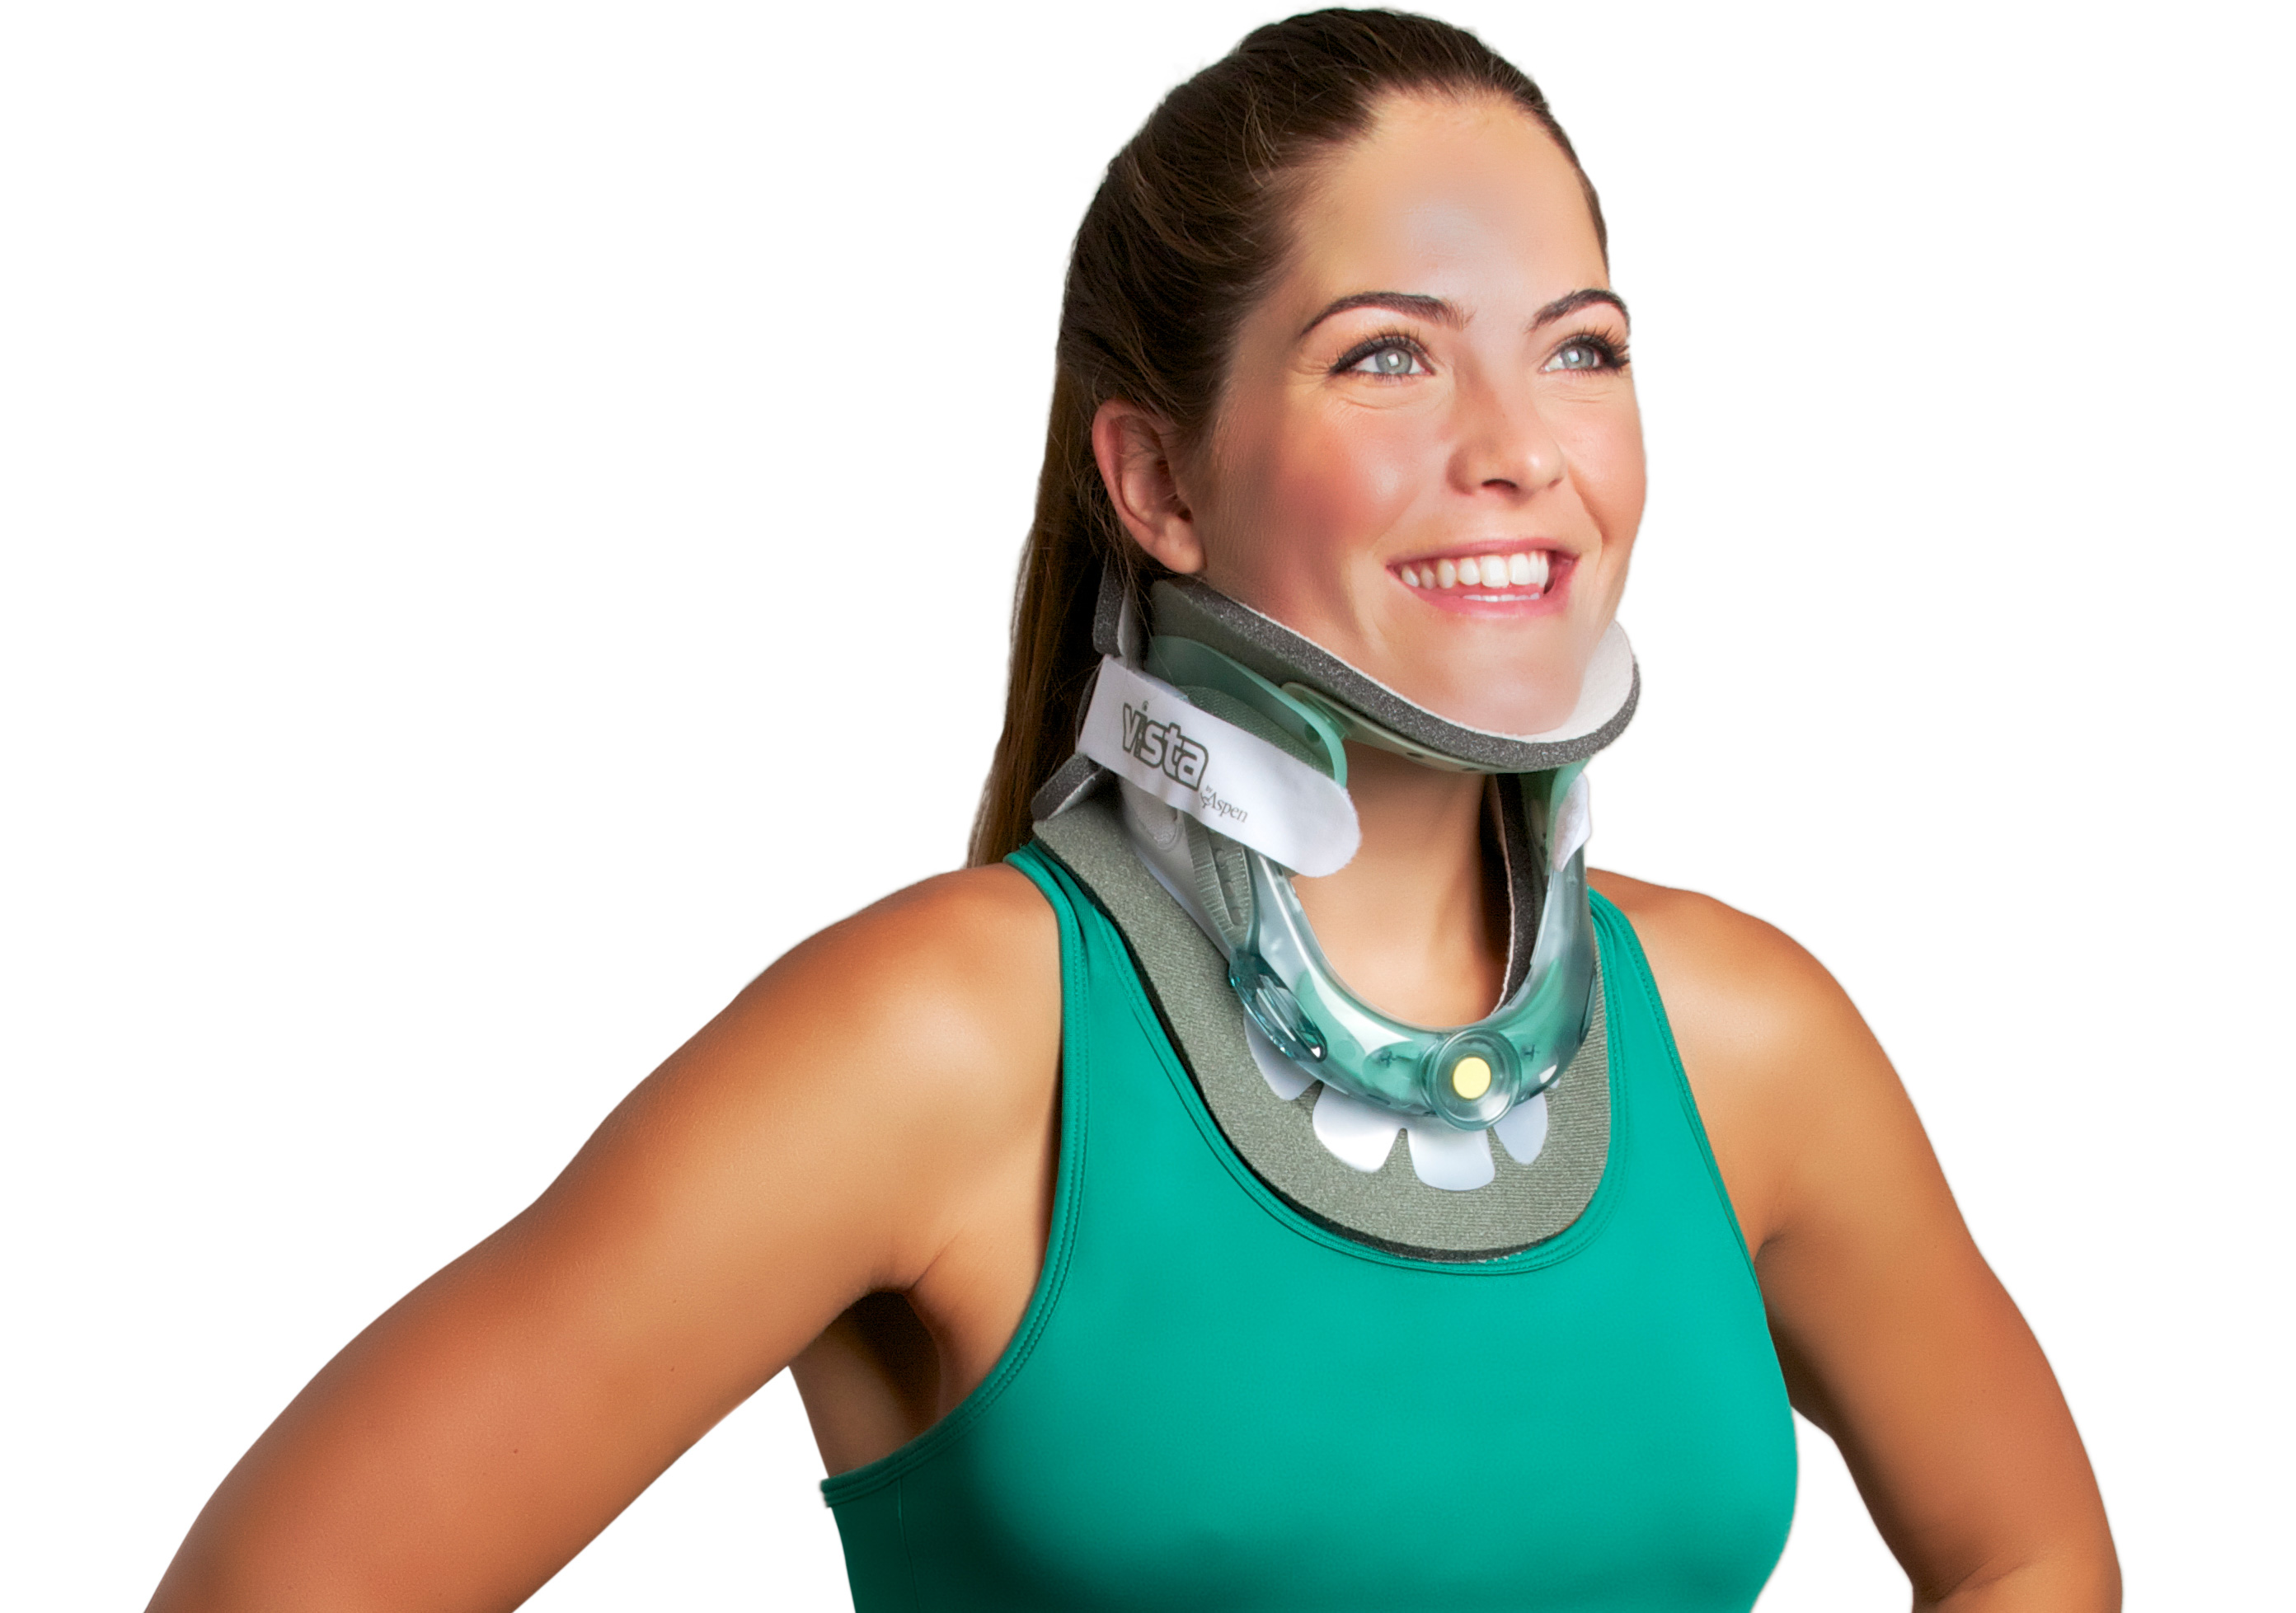 neck brace for working out. 